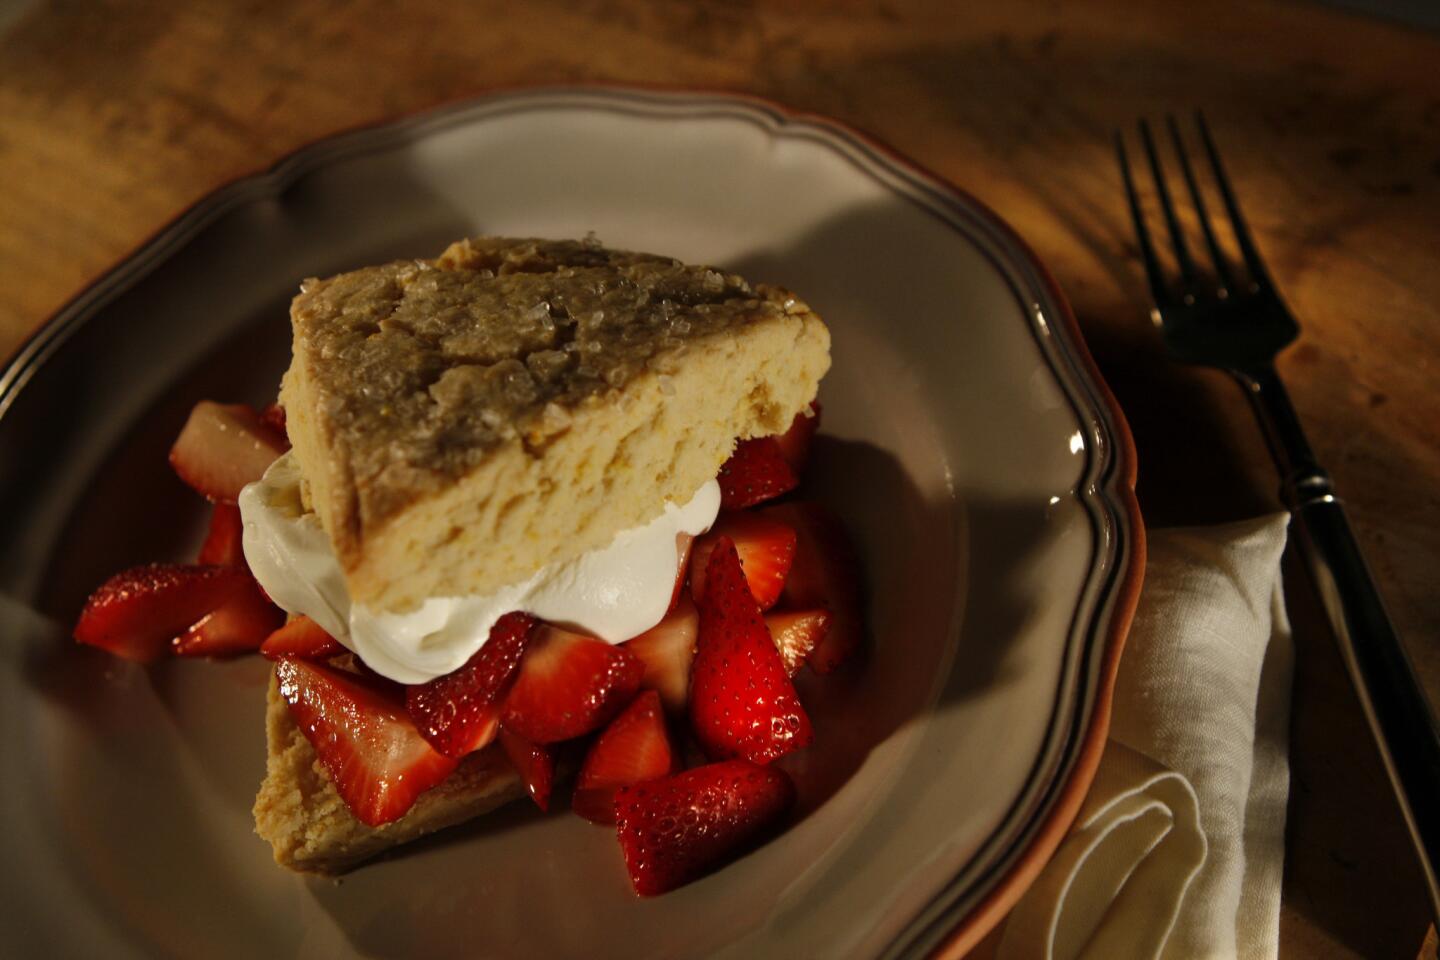 Orange-flavored shortcakes with strawberries and cream